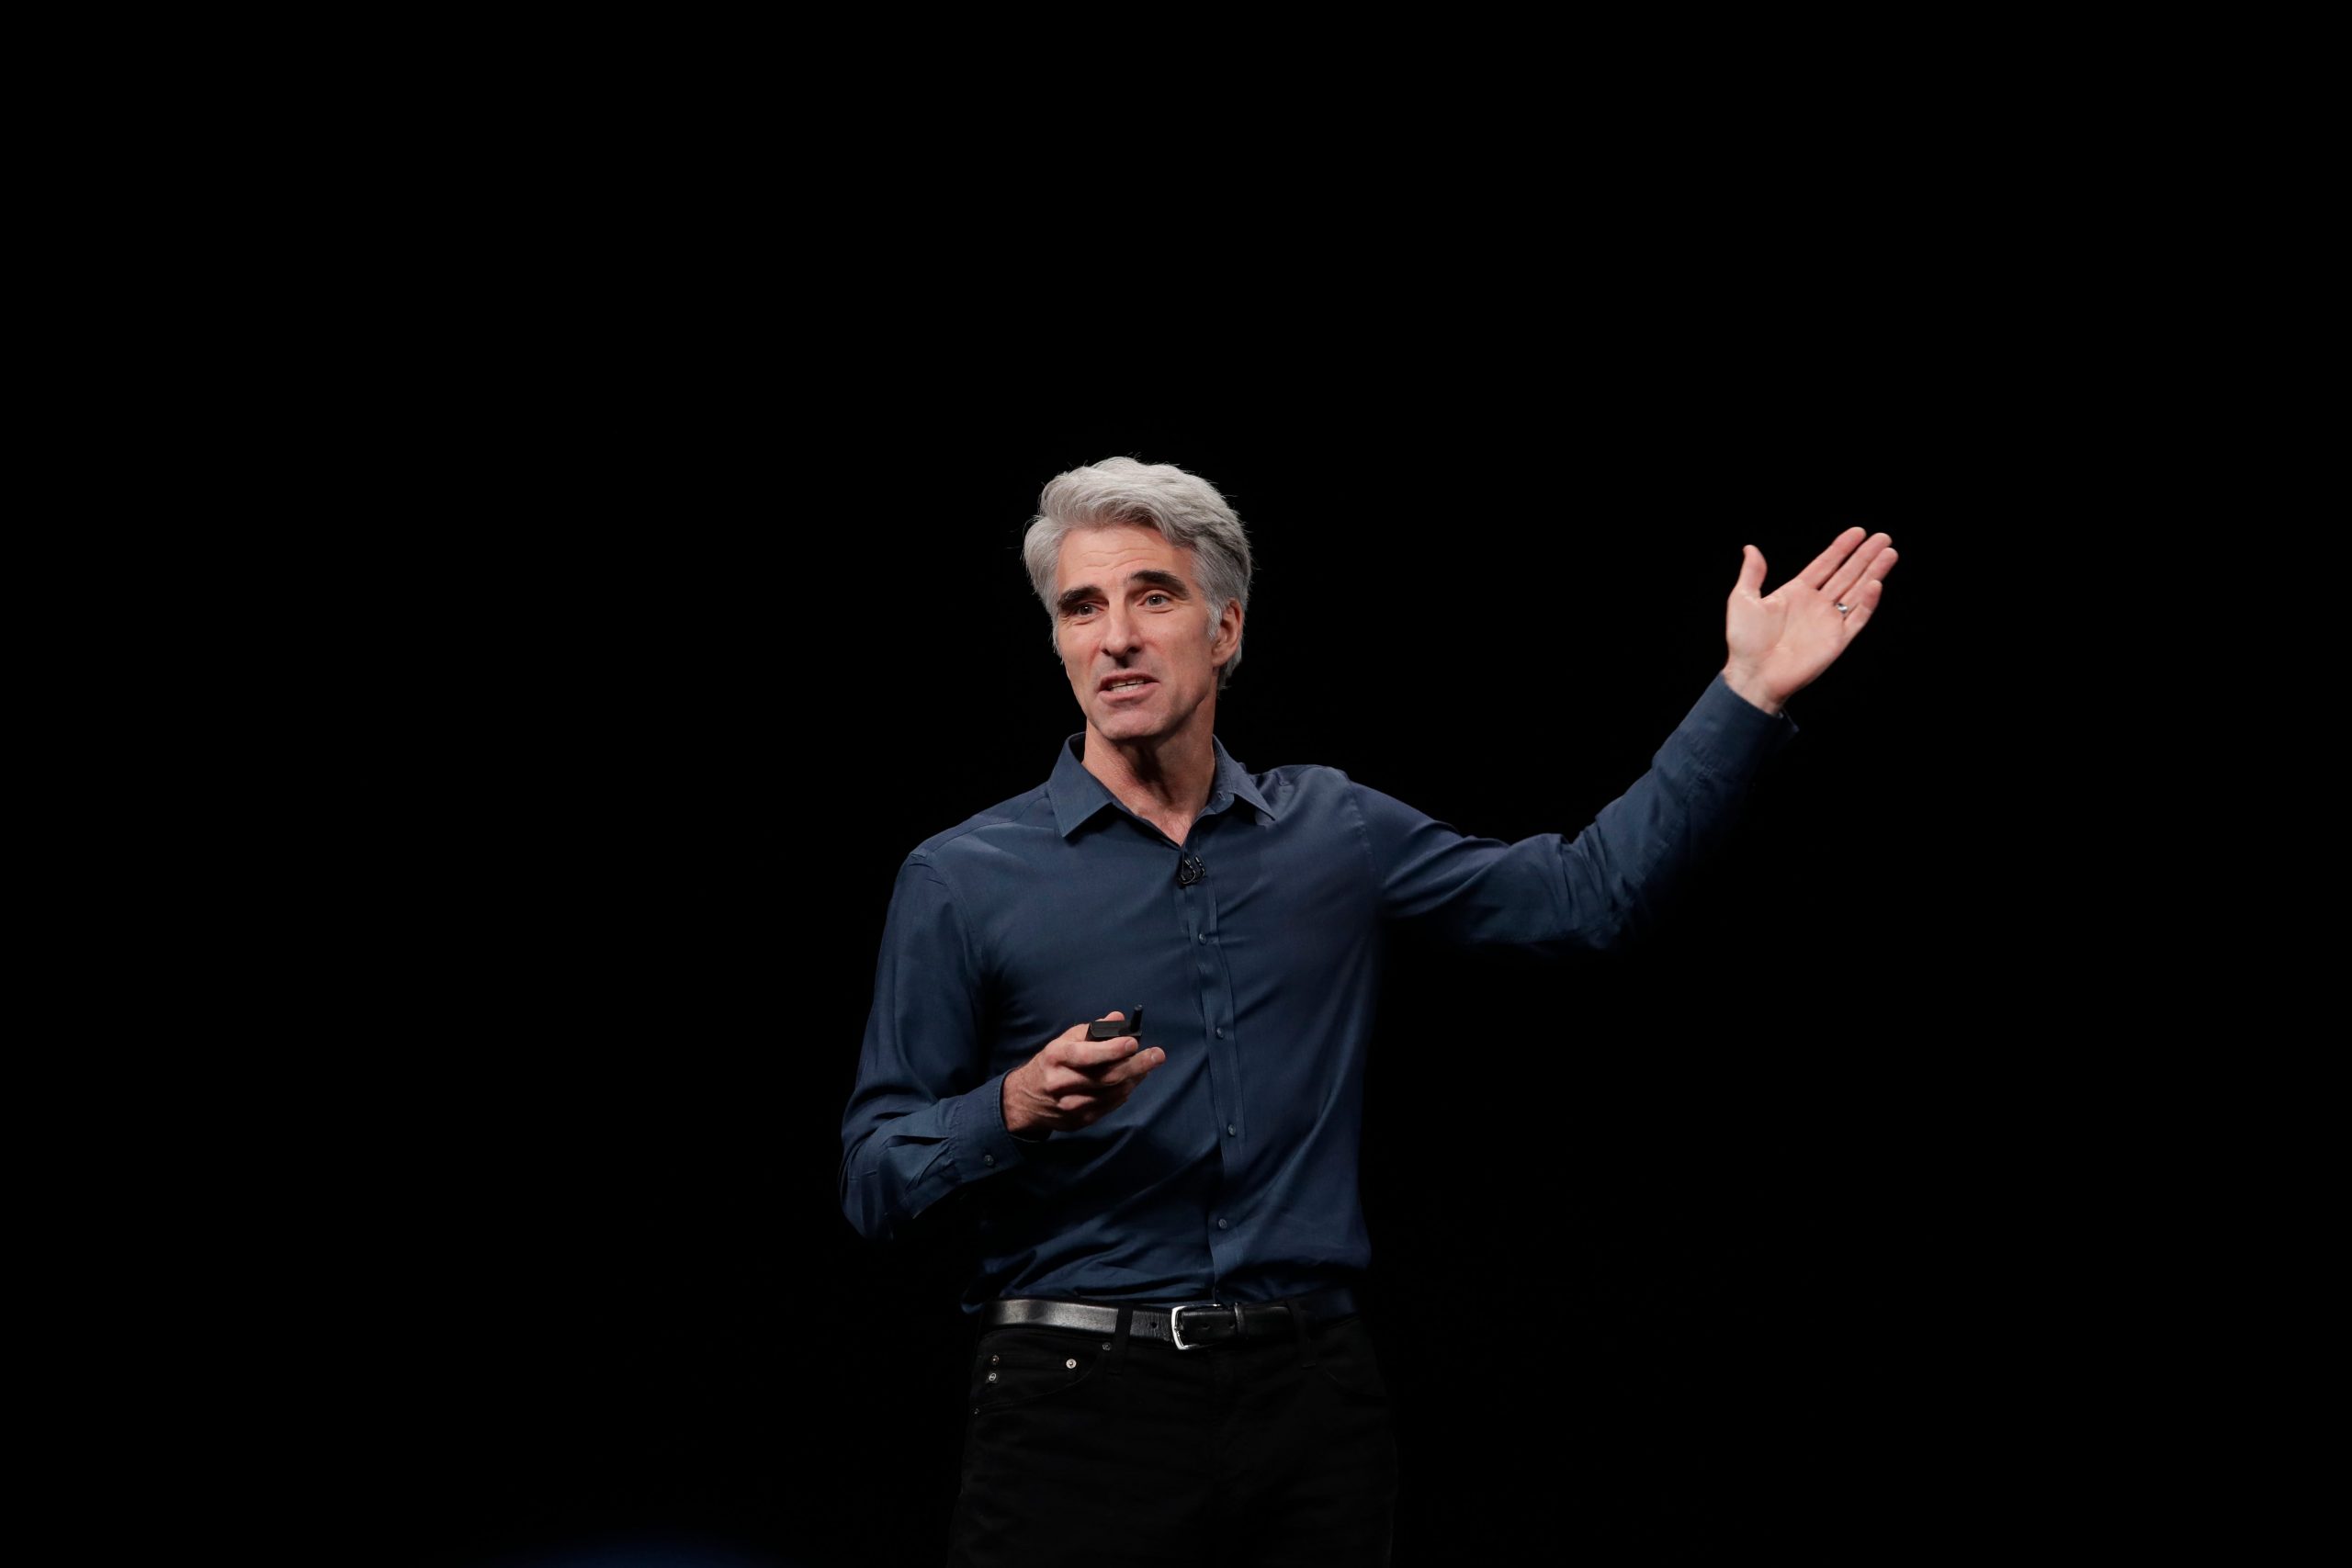 Apple SVP Craig Federighi raises his hand as he speaks on stage in front of a black background